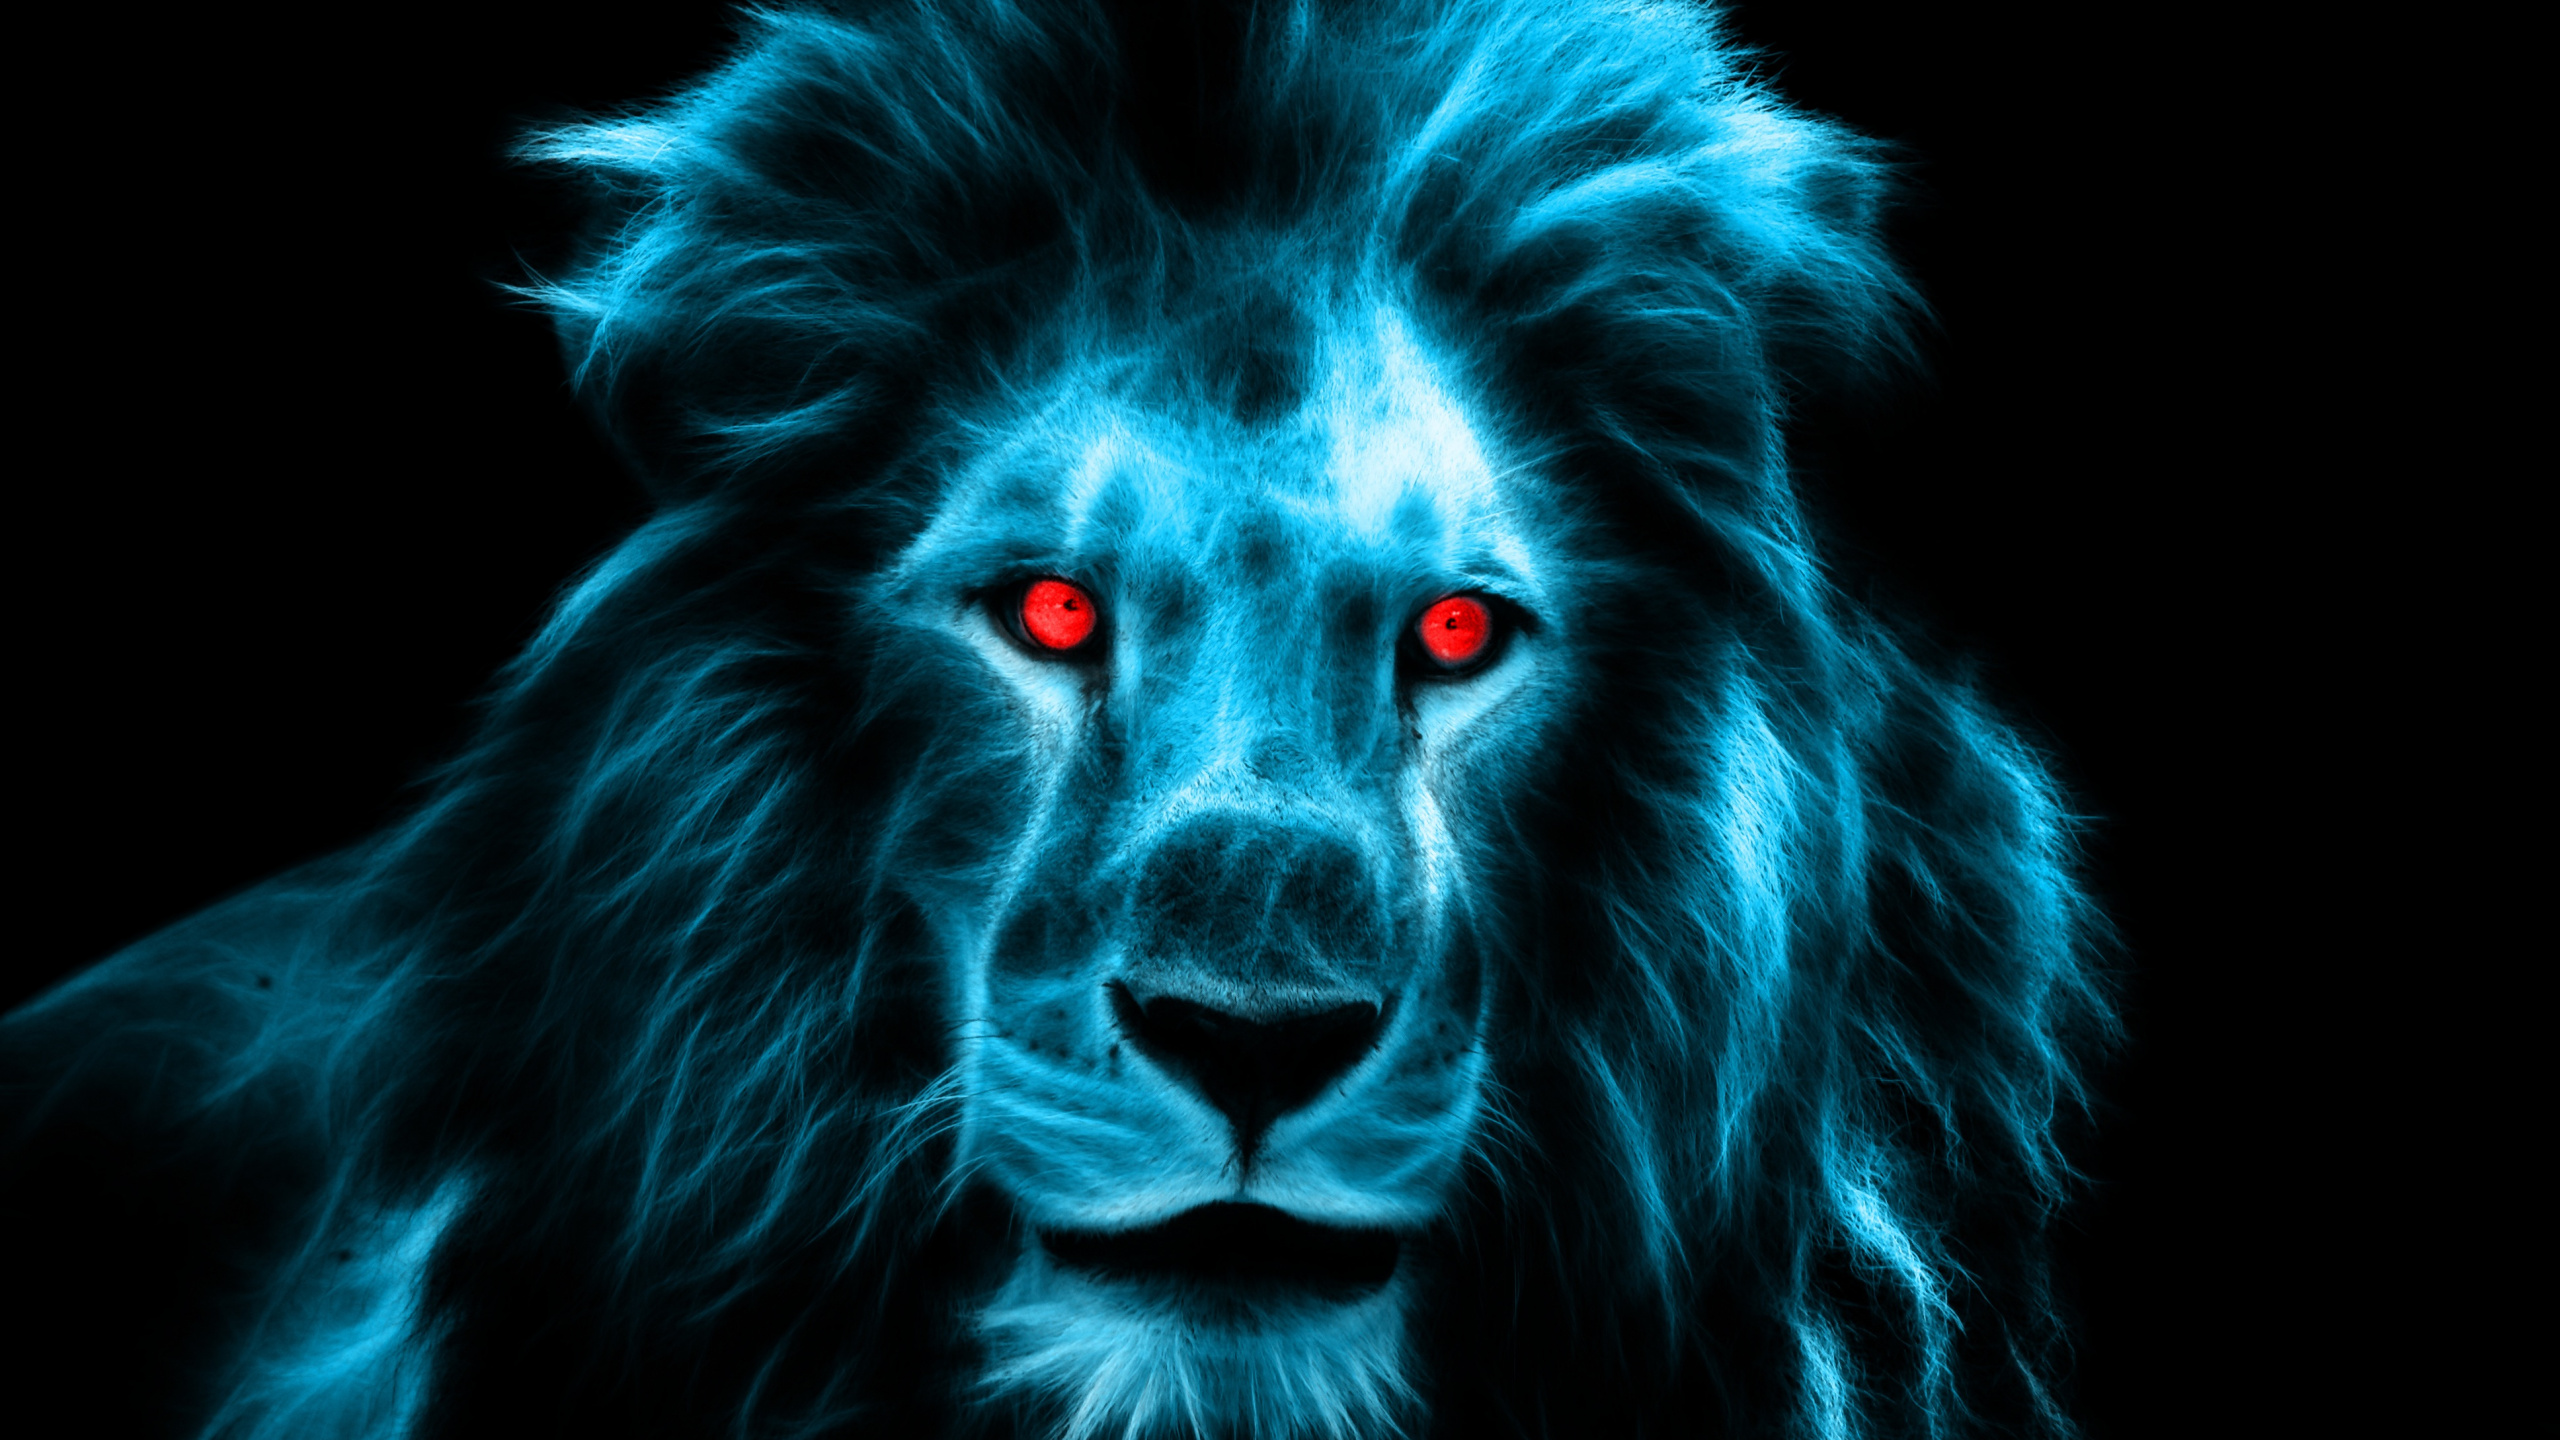 Lion With Blue Eyes Illustration. Wallpaper in 2560x1440 Resolution